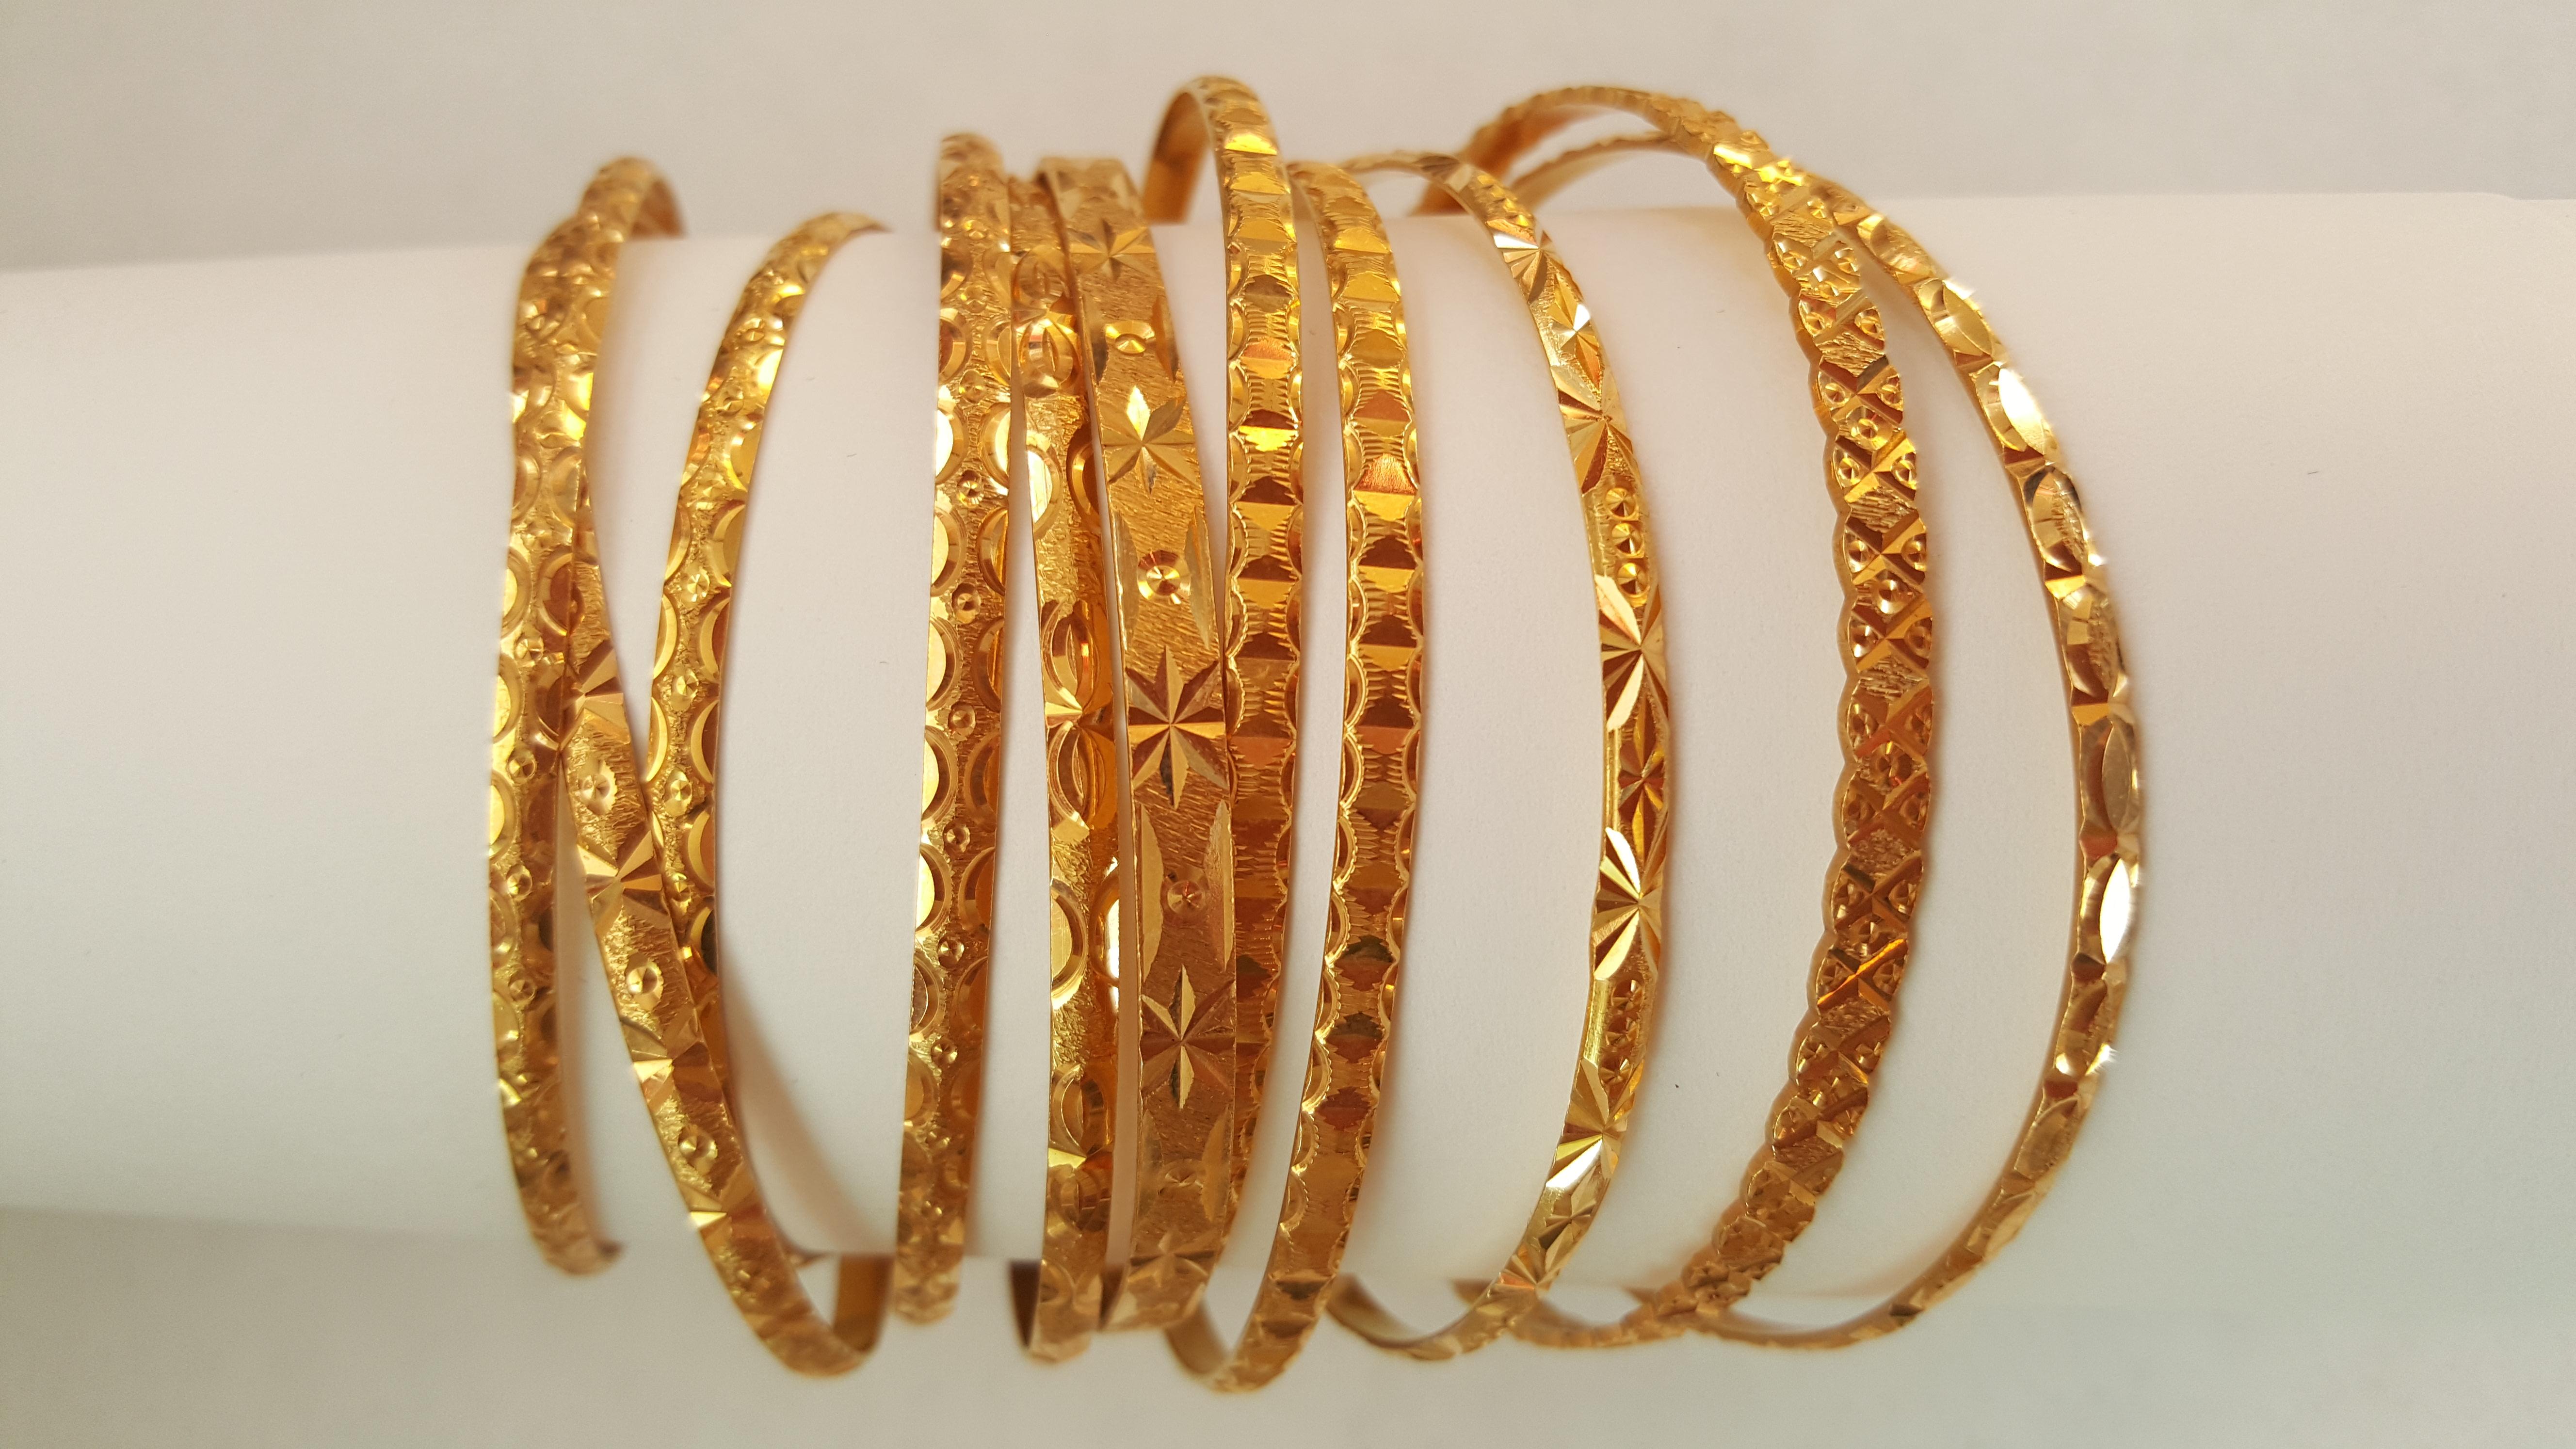 Solid 21kt Gold Bangles, Set of 11, Very Good Condition, Diamond Cut Engraving. These are beautiful bracelets with unique diamond-cut designs. If you want to see more images, please let us know. Ten of the bracelets are standard adult size. One of